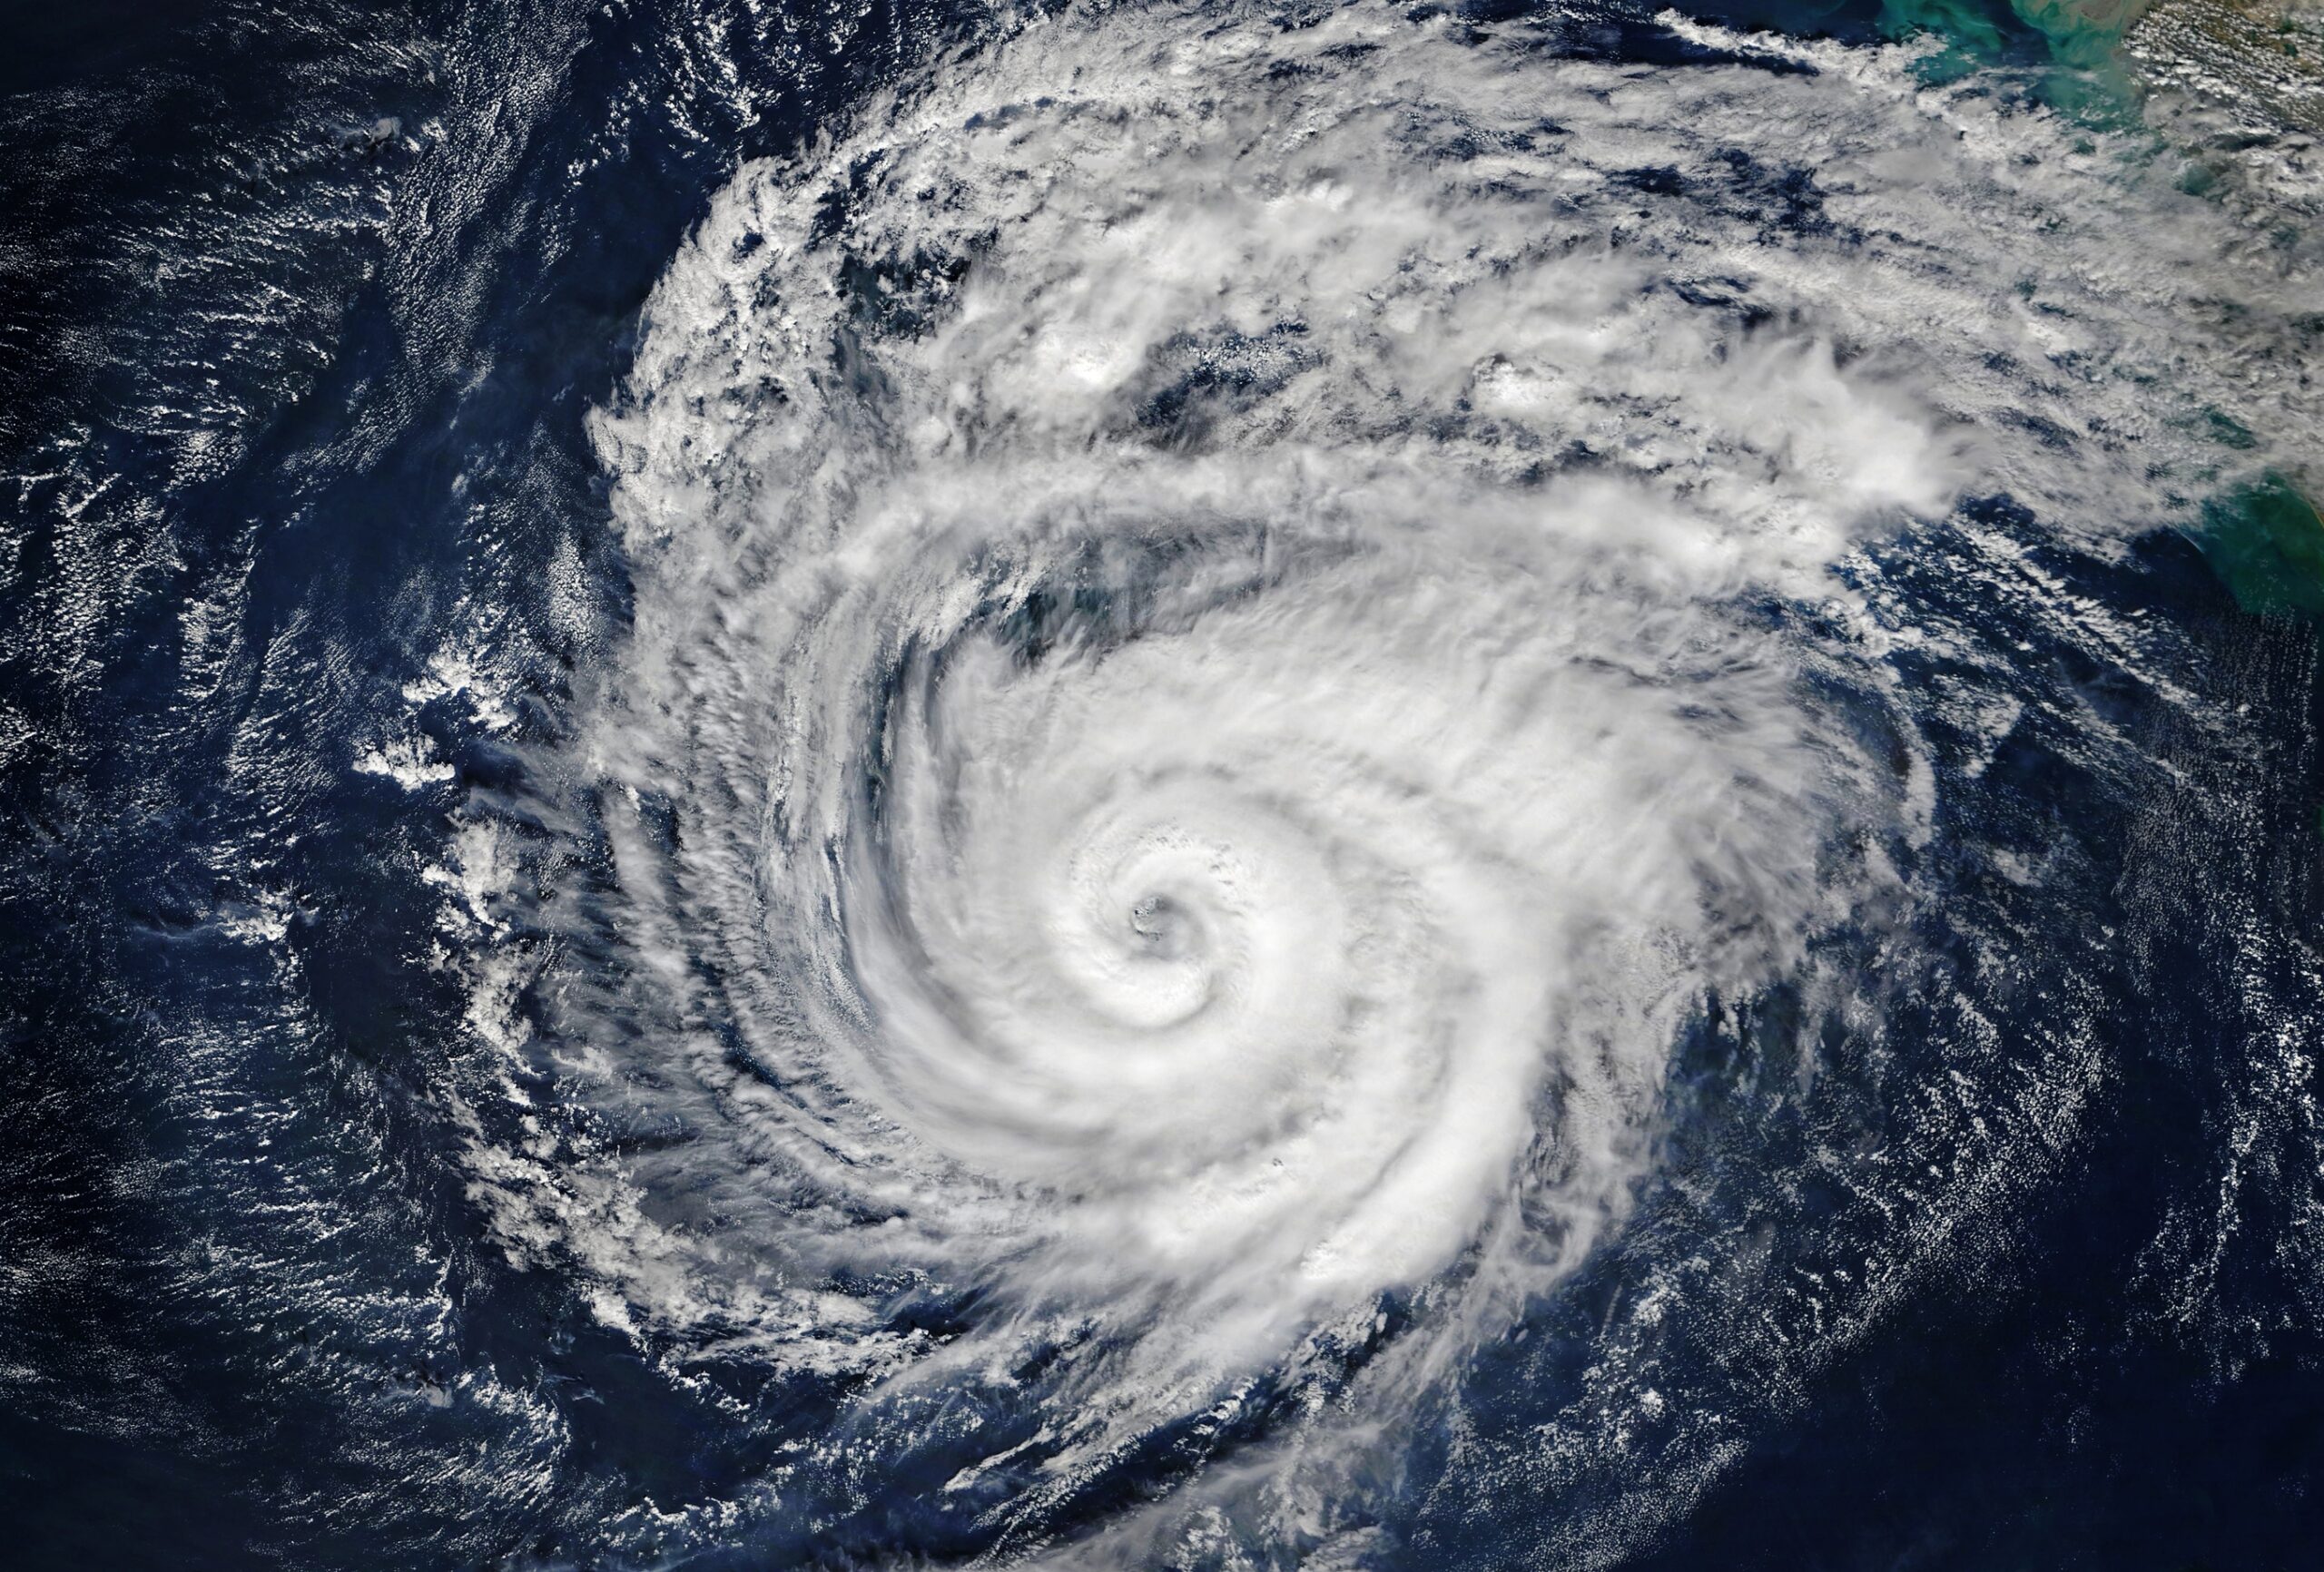 A hurricane seen from above.